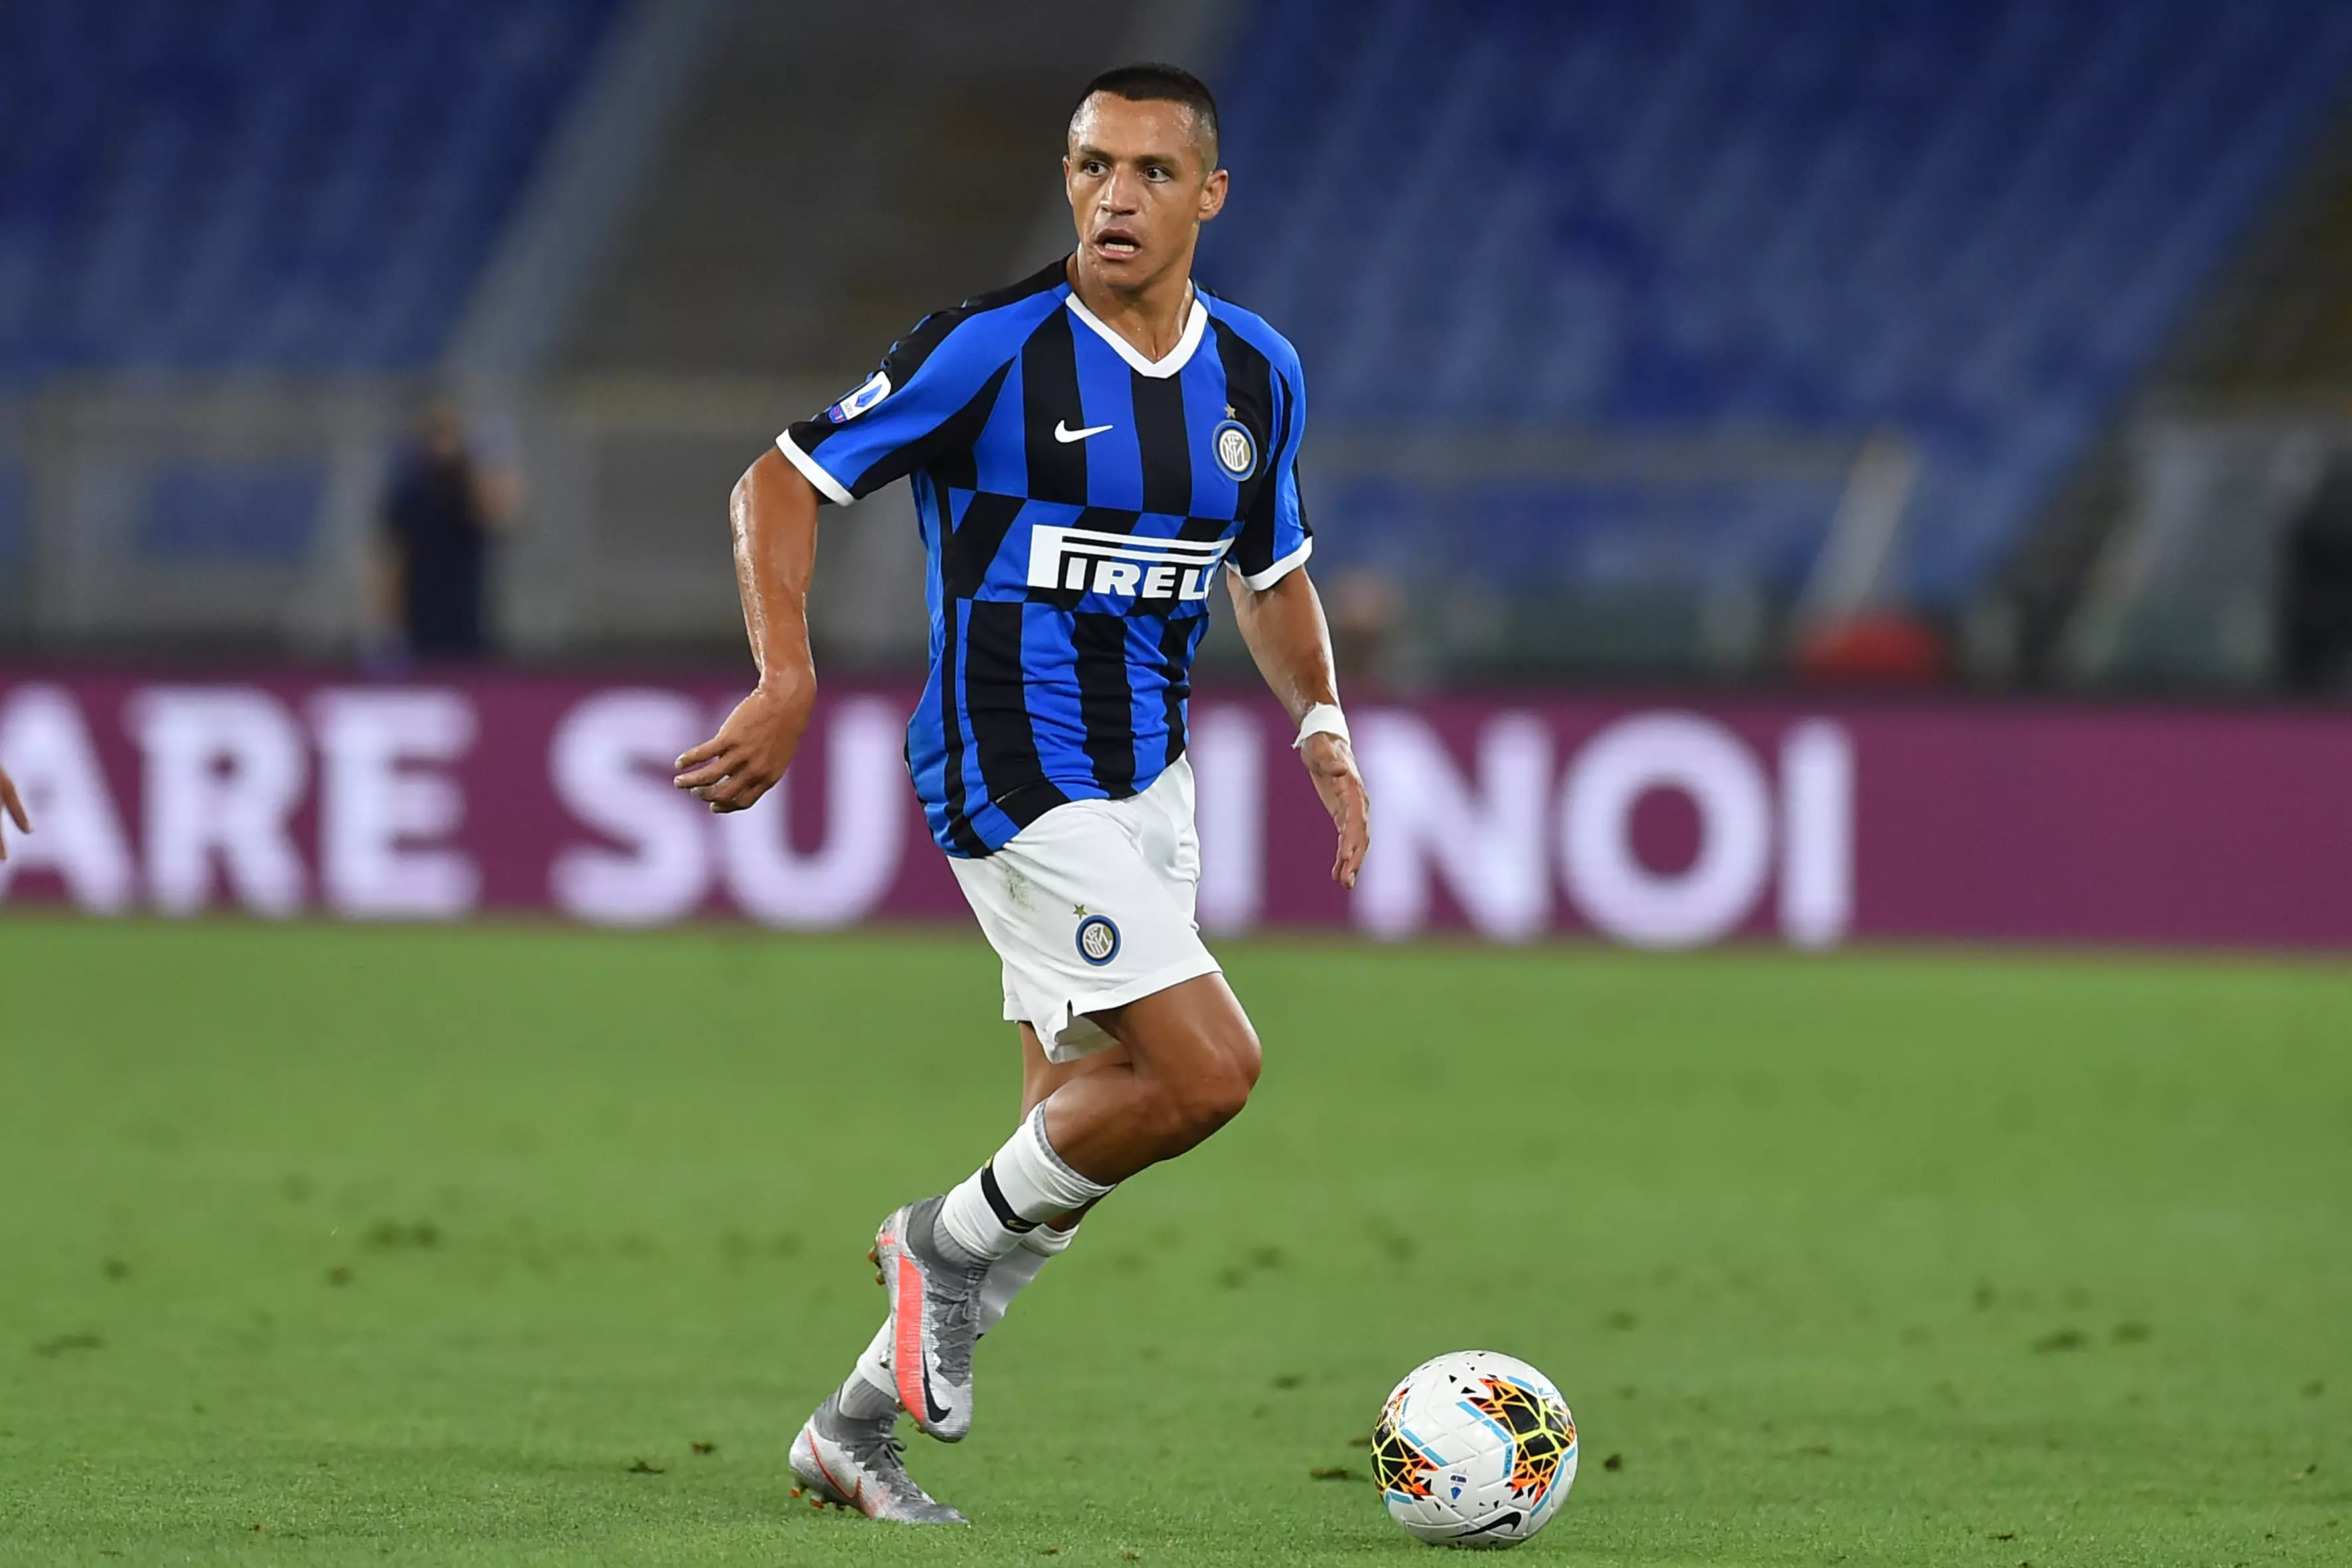 Sanchez has played for Inter this season. Image: PA Images